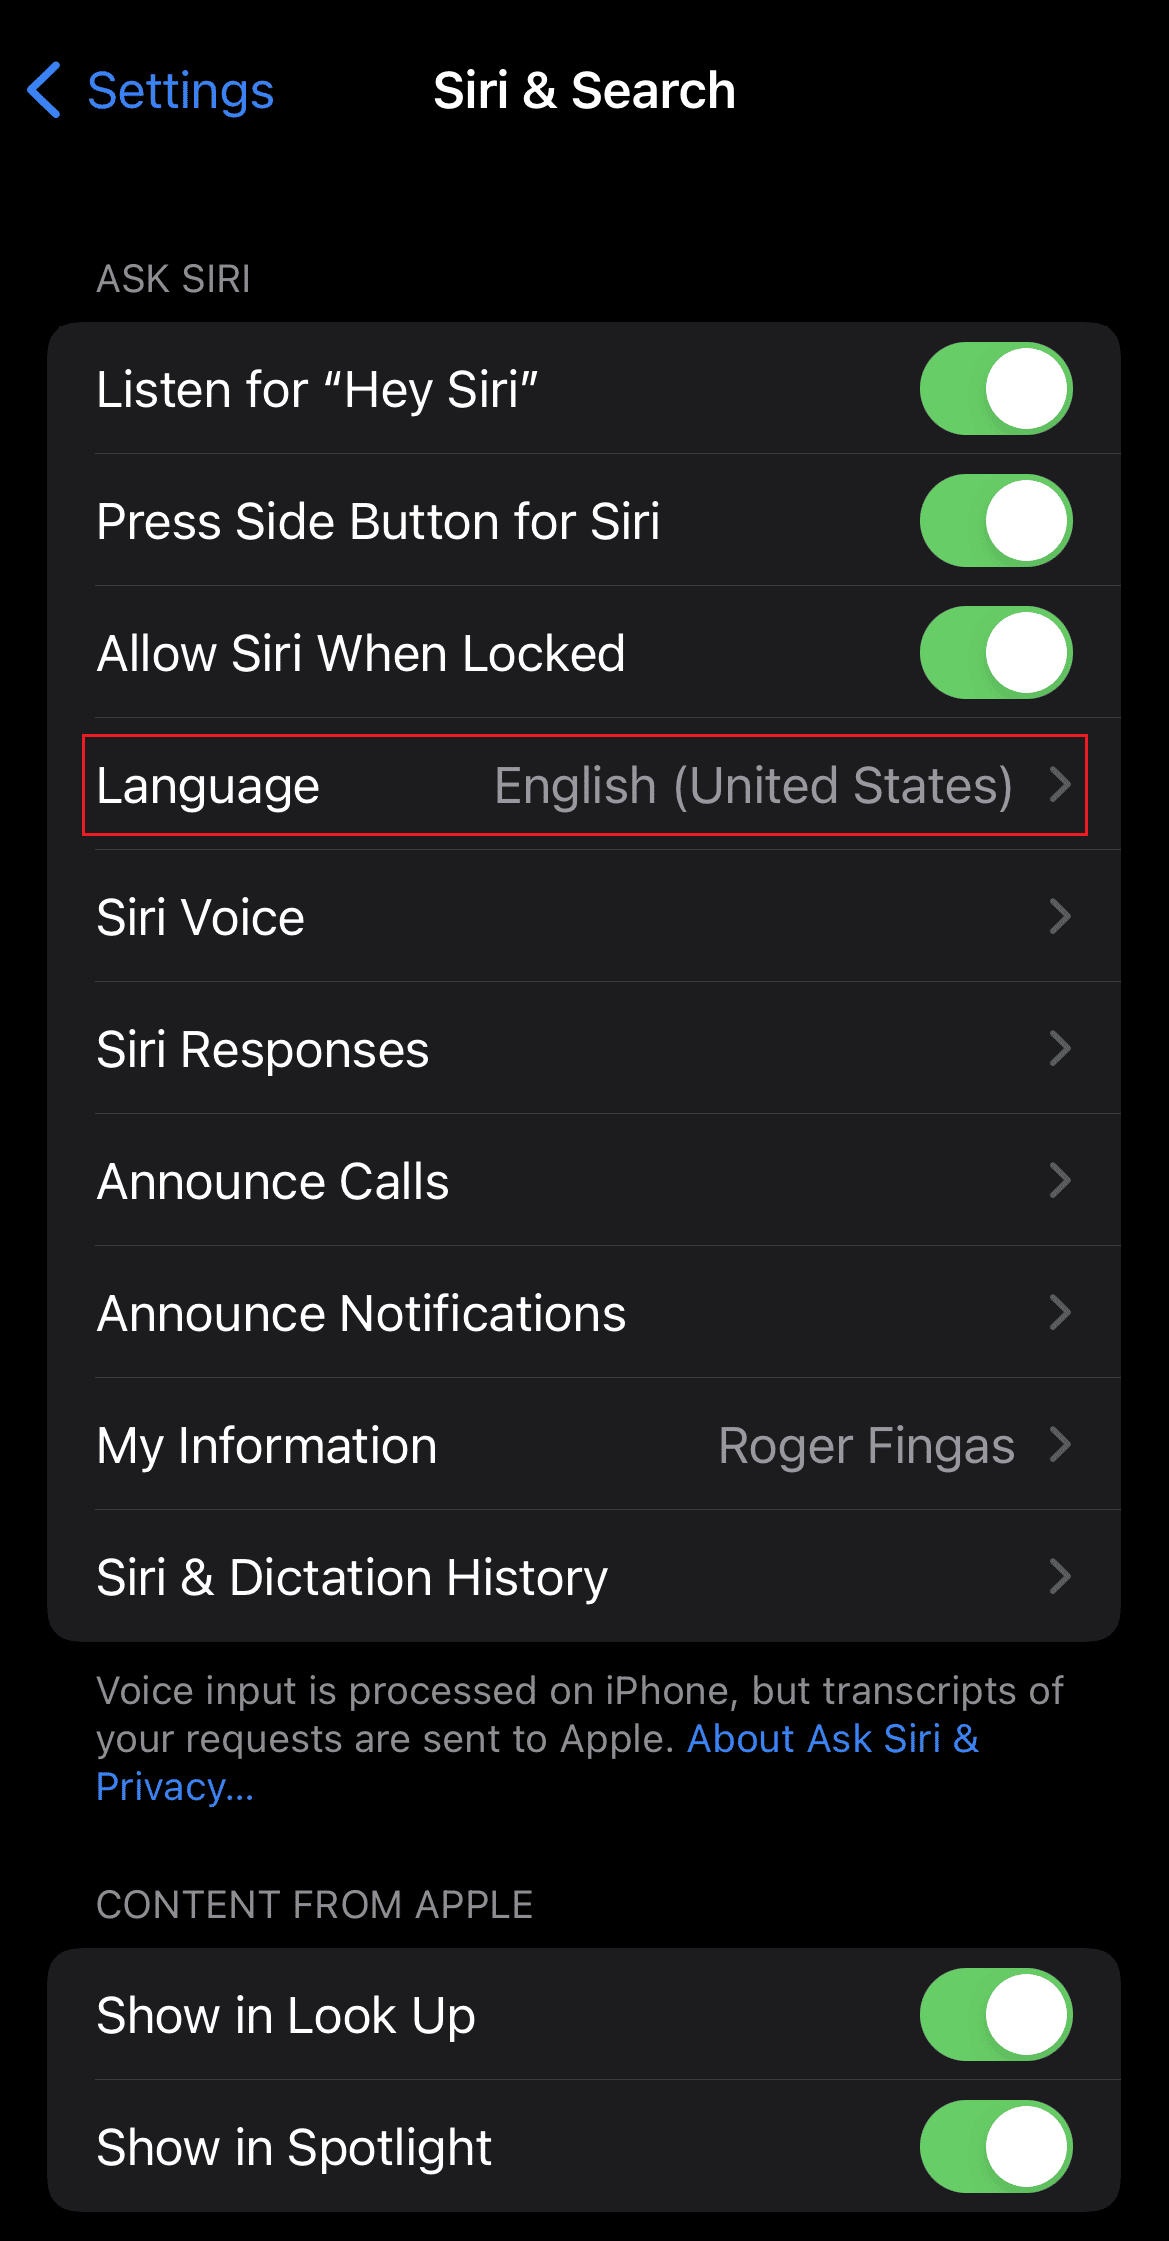 tap on the Language option and select the desired language from the list | Hey Siri not working